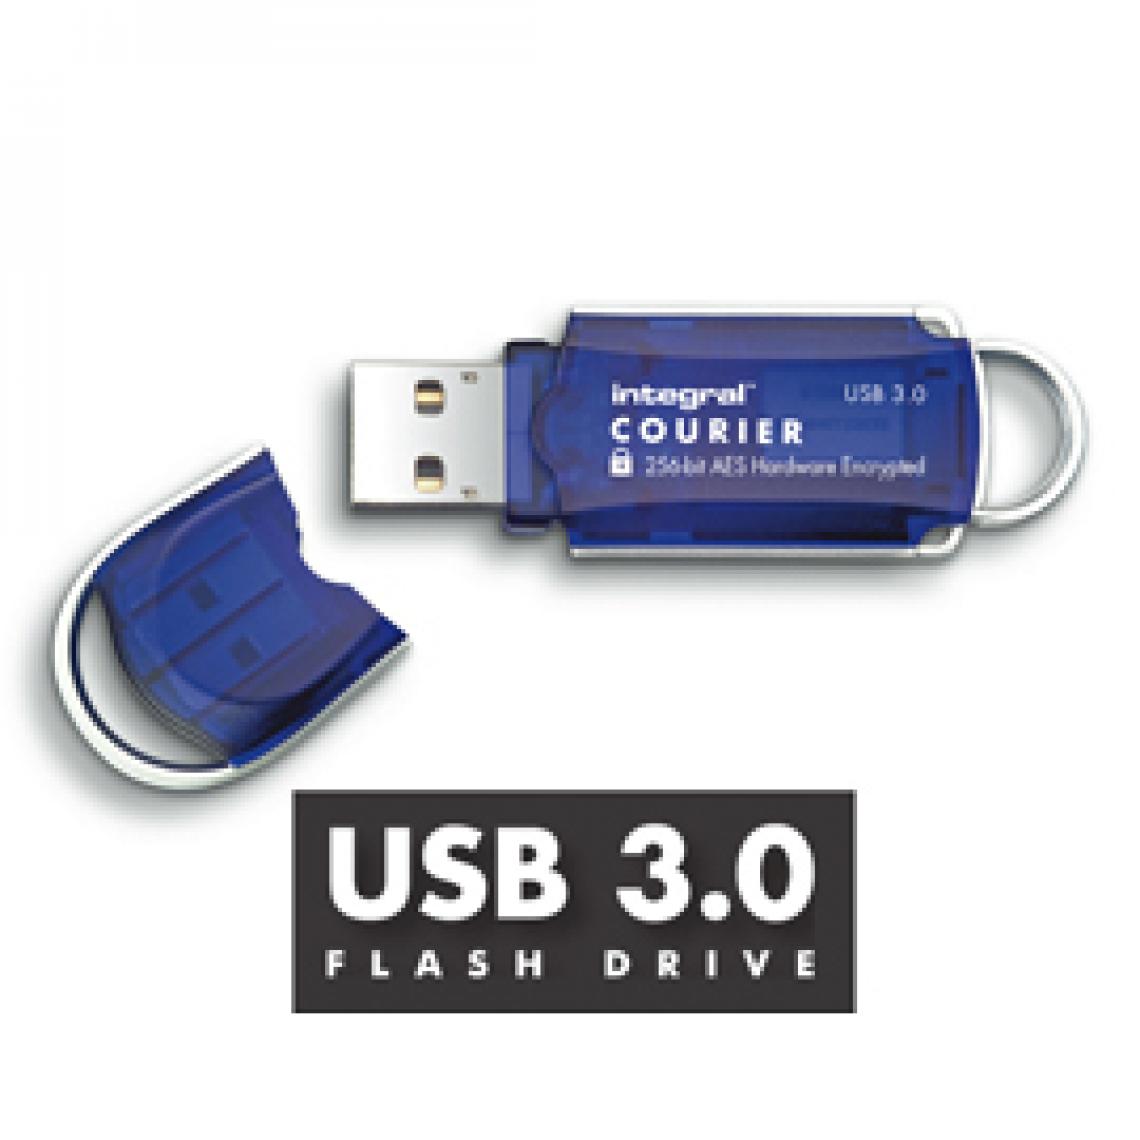 Integral - Integral Courier FIPS 197 Encrypted USB 3.0 - Clés USB